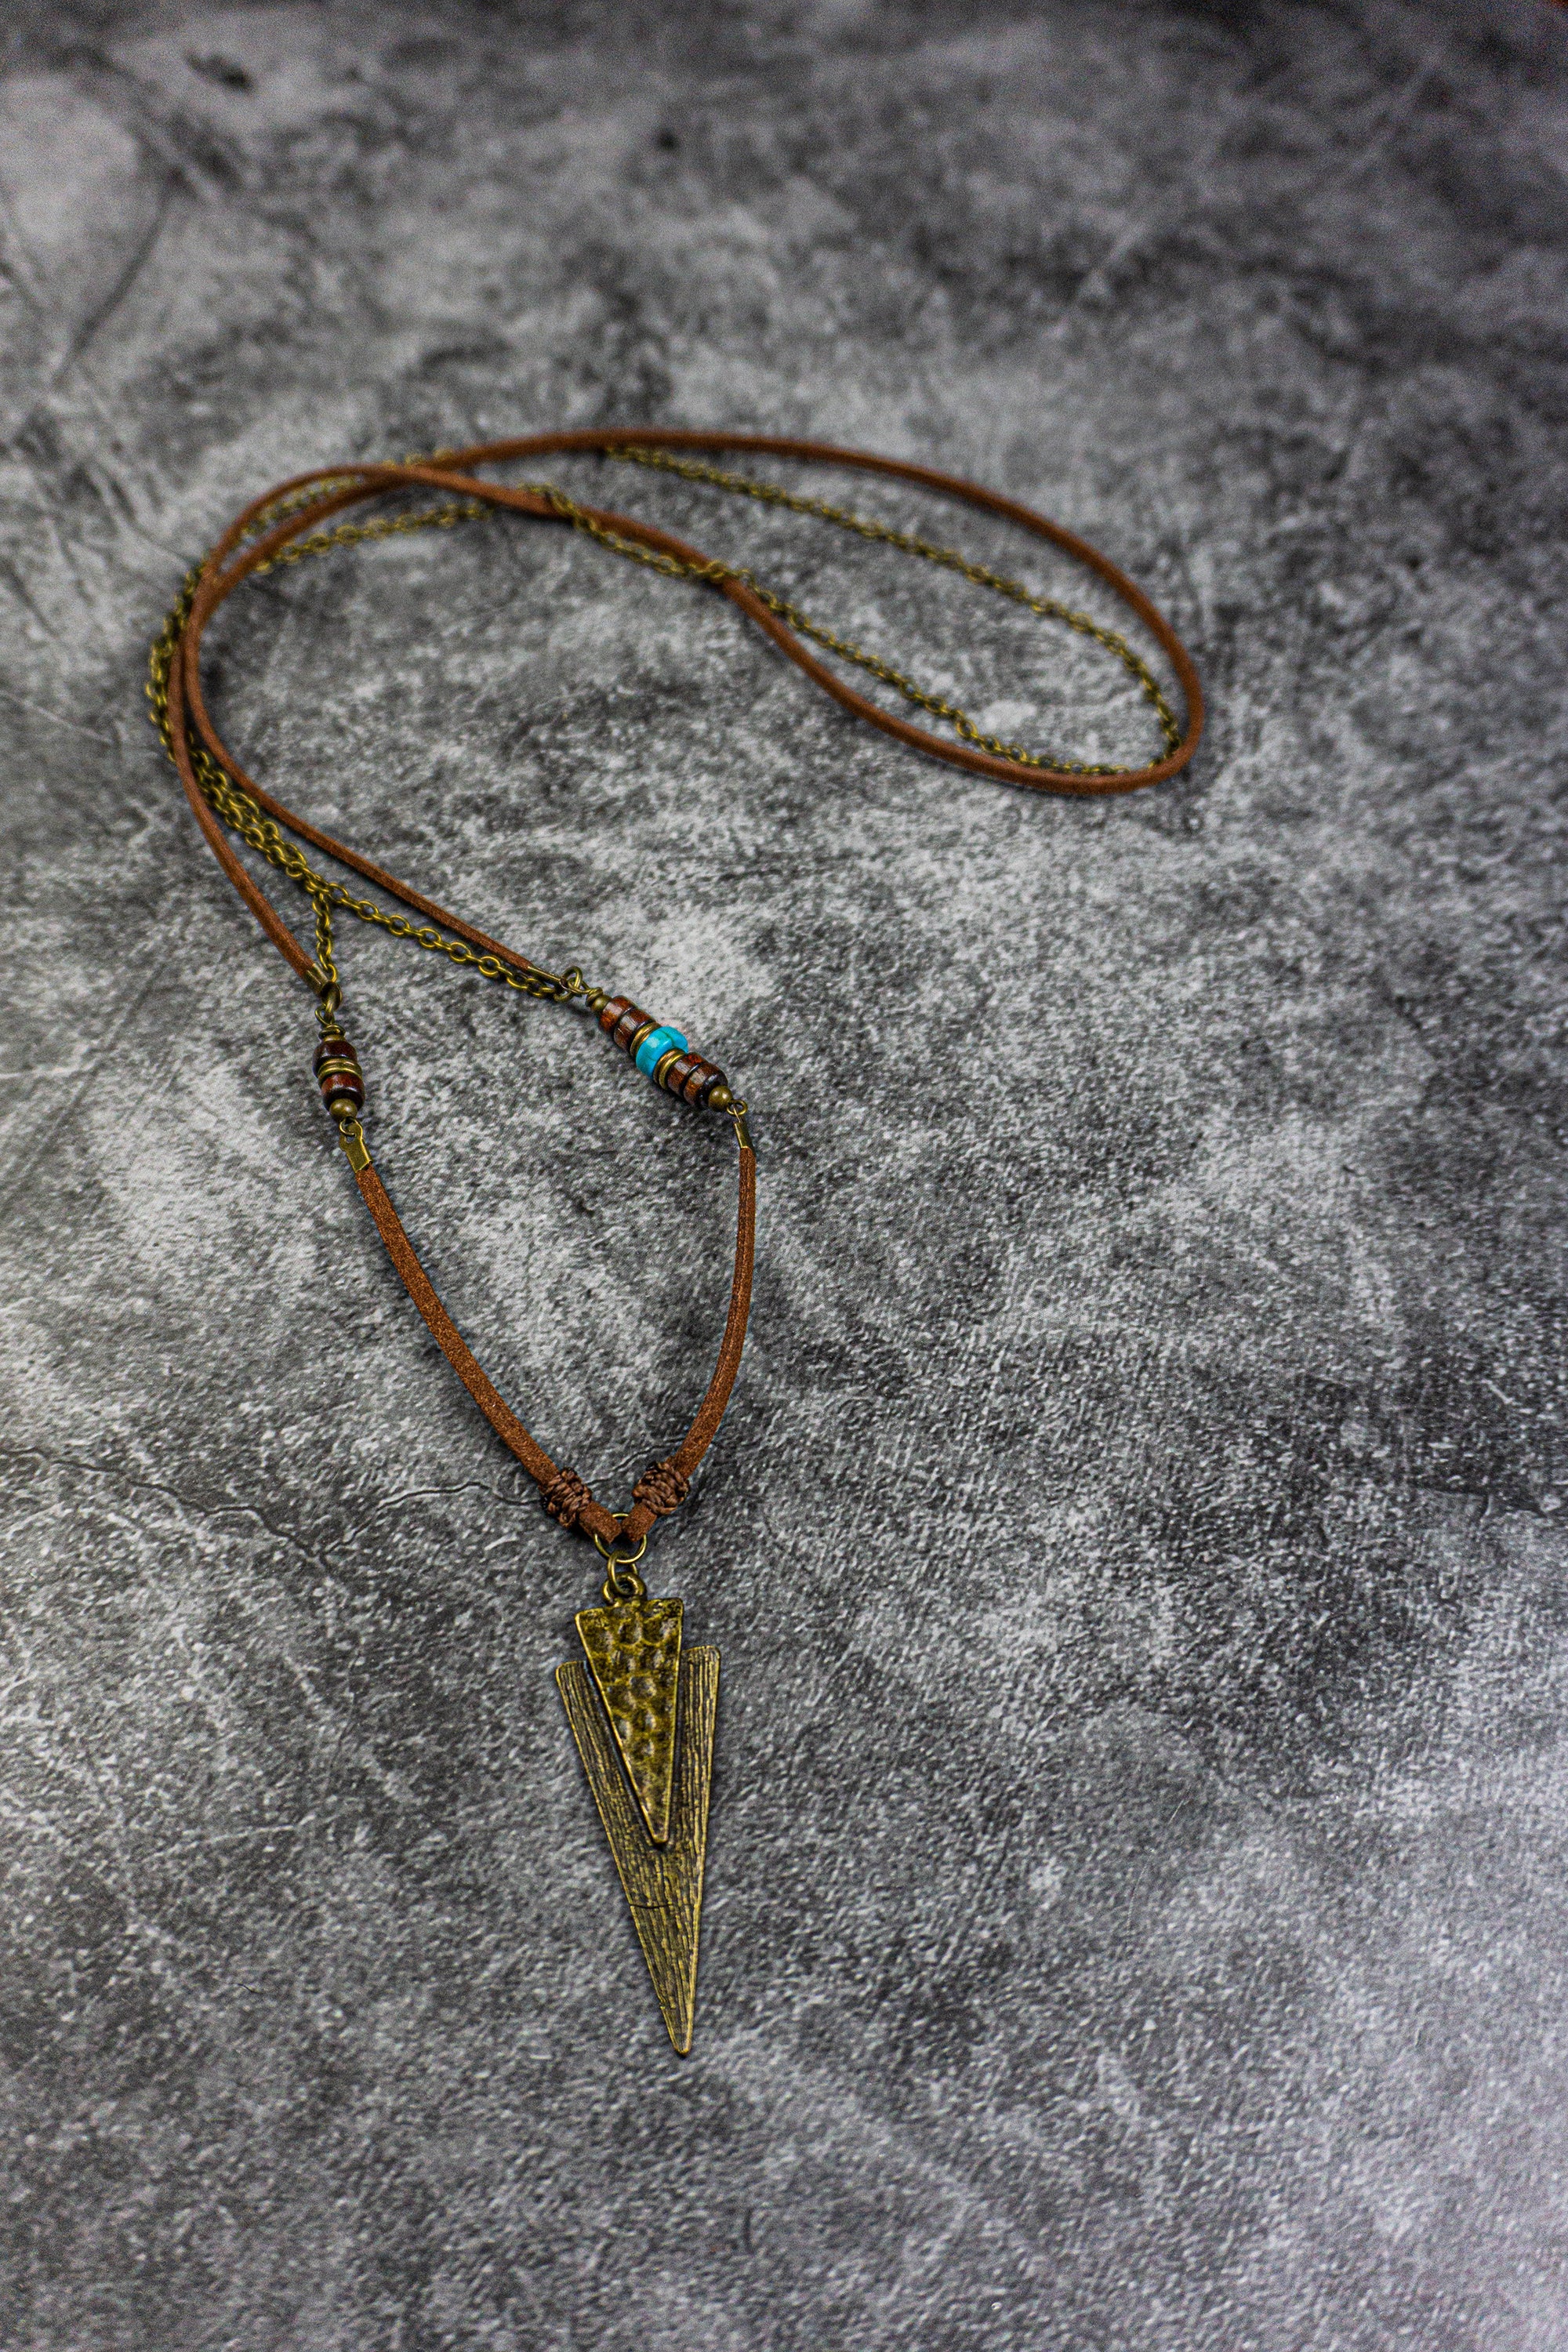 long leather and chain necklace with a triangle arrowead bronze pendant